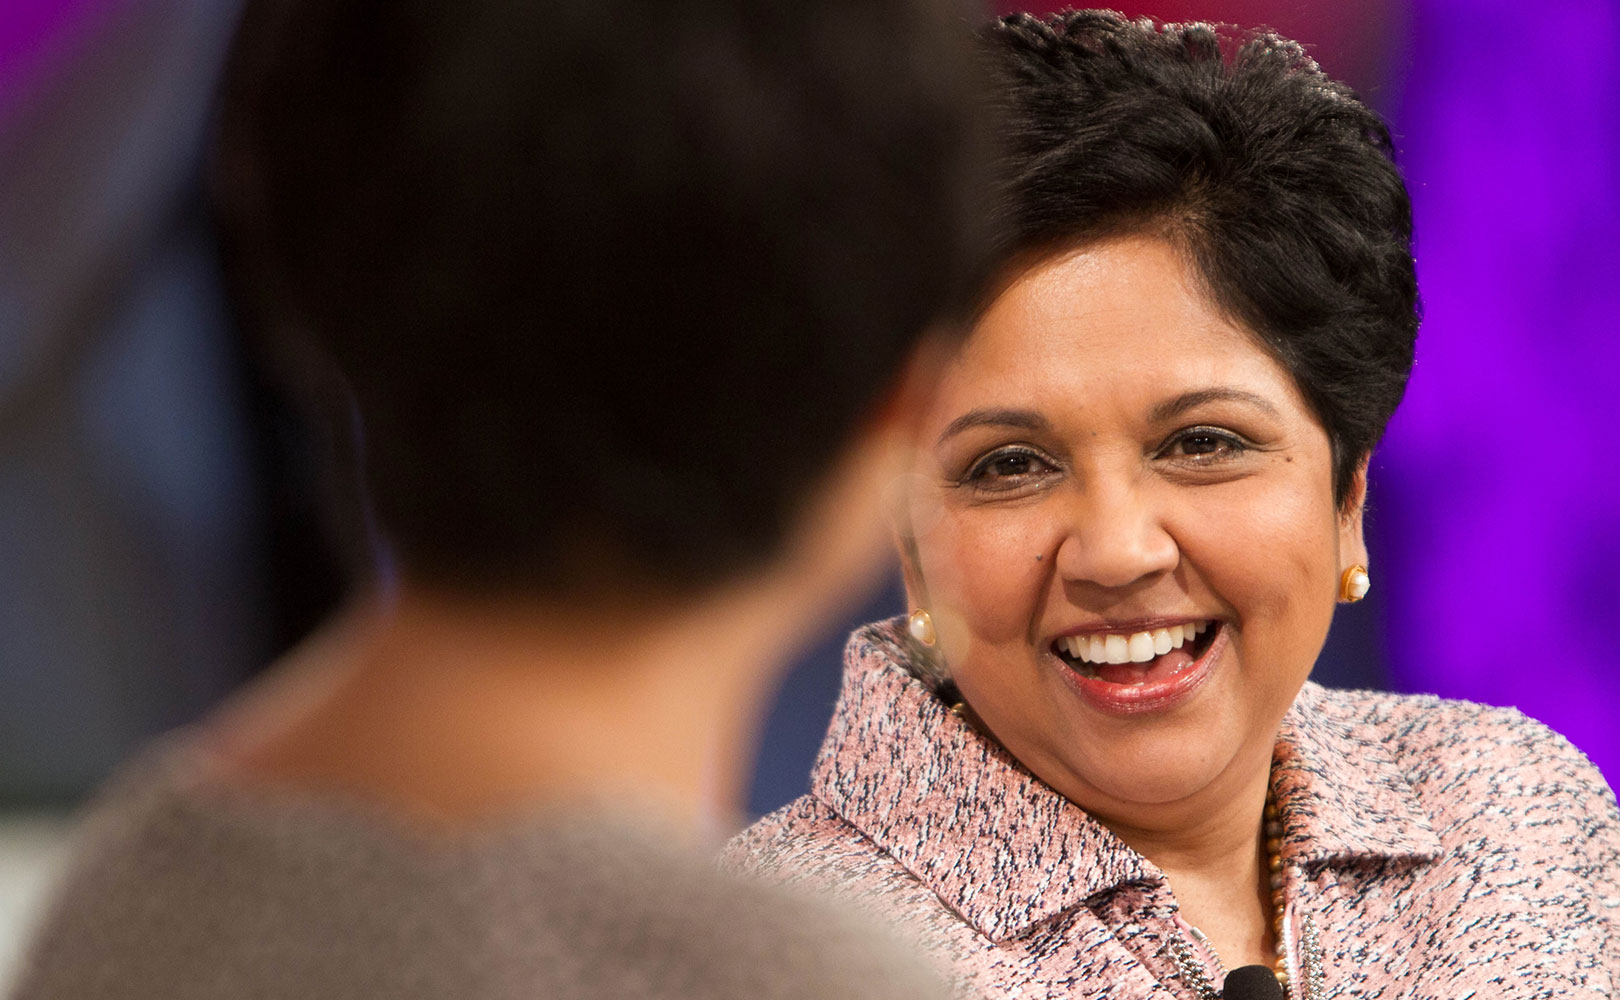 Indra Nooyi, Donald Trump, PepsiCo, US President, Third World War, Politics, Former CEO of PepsiCo, Indian born Indra Nooyi, Game Changer of the Year Award, Business news